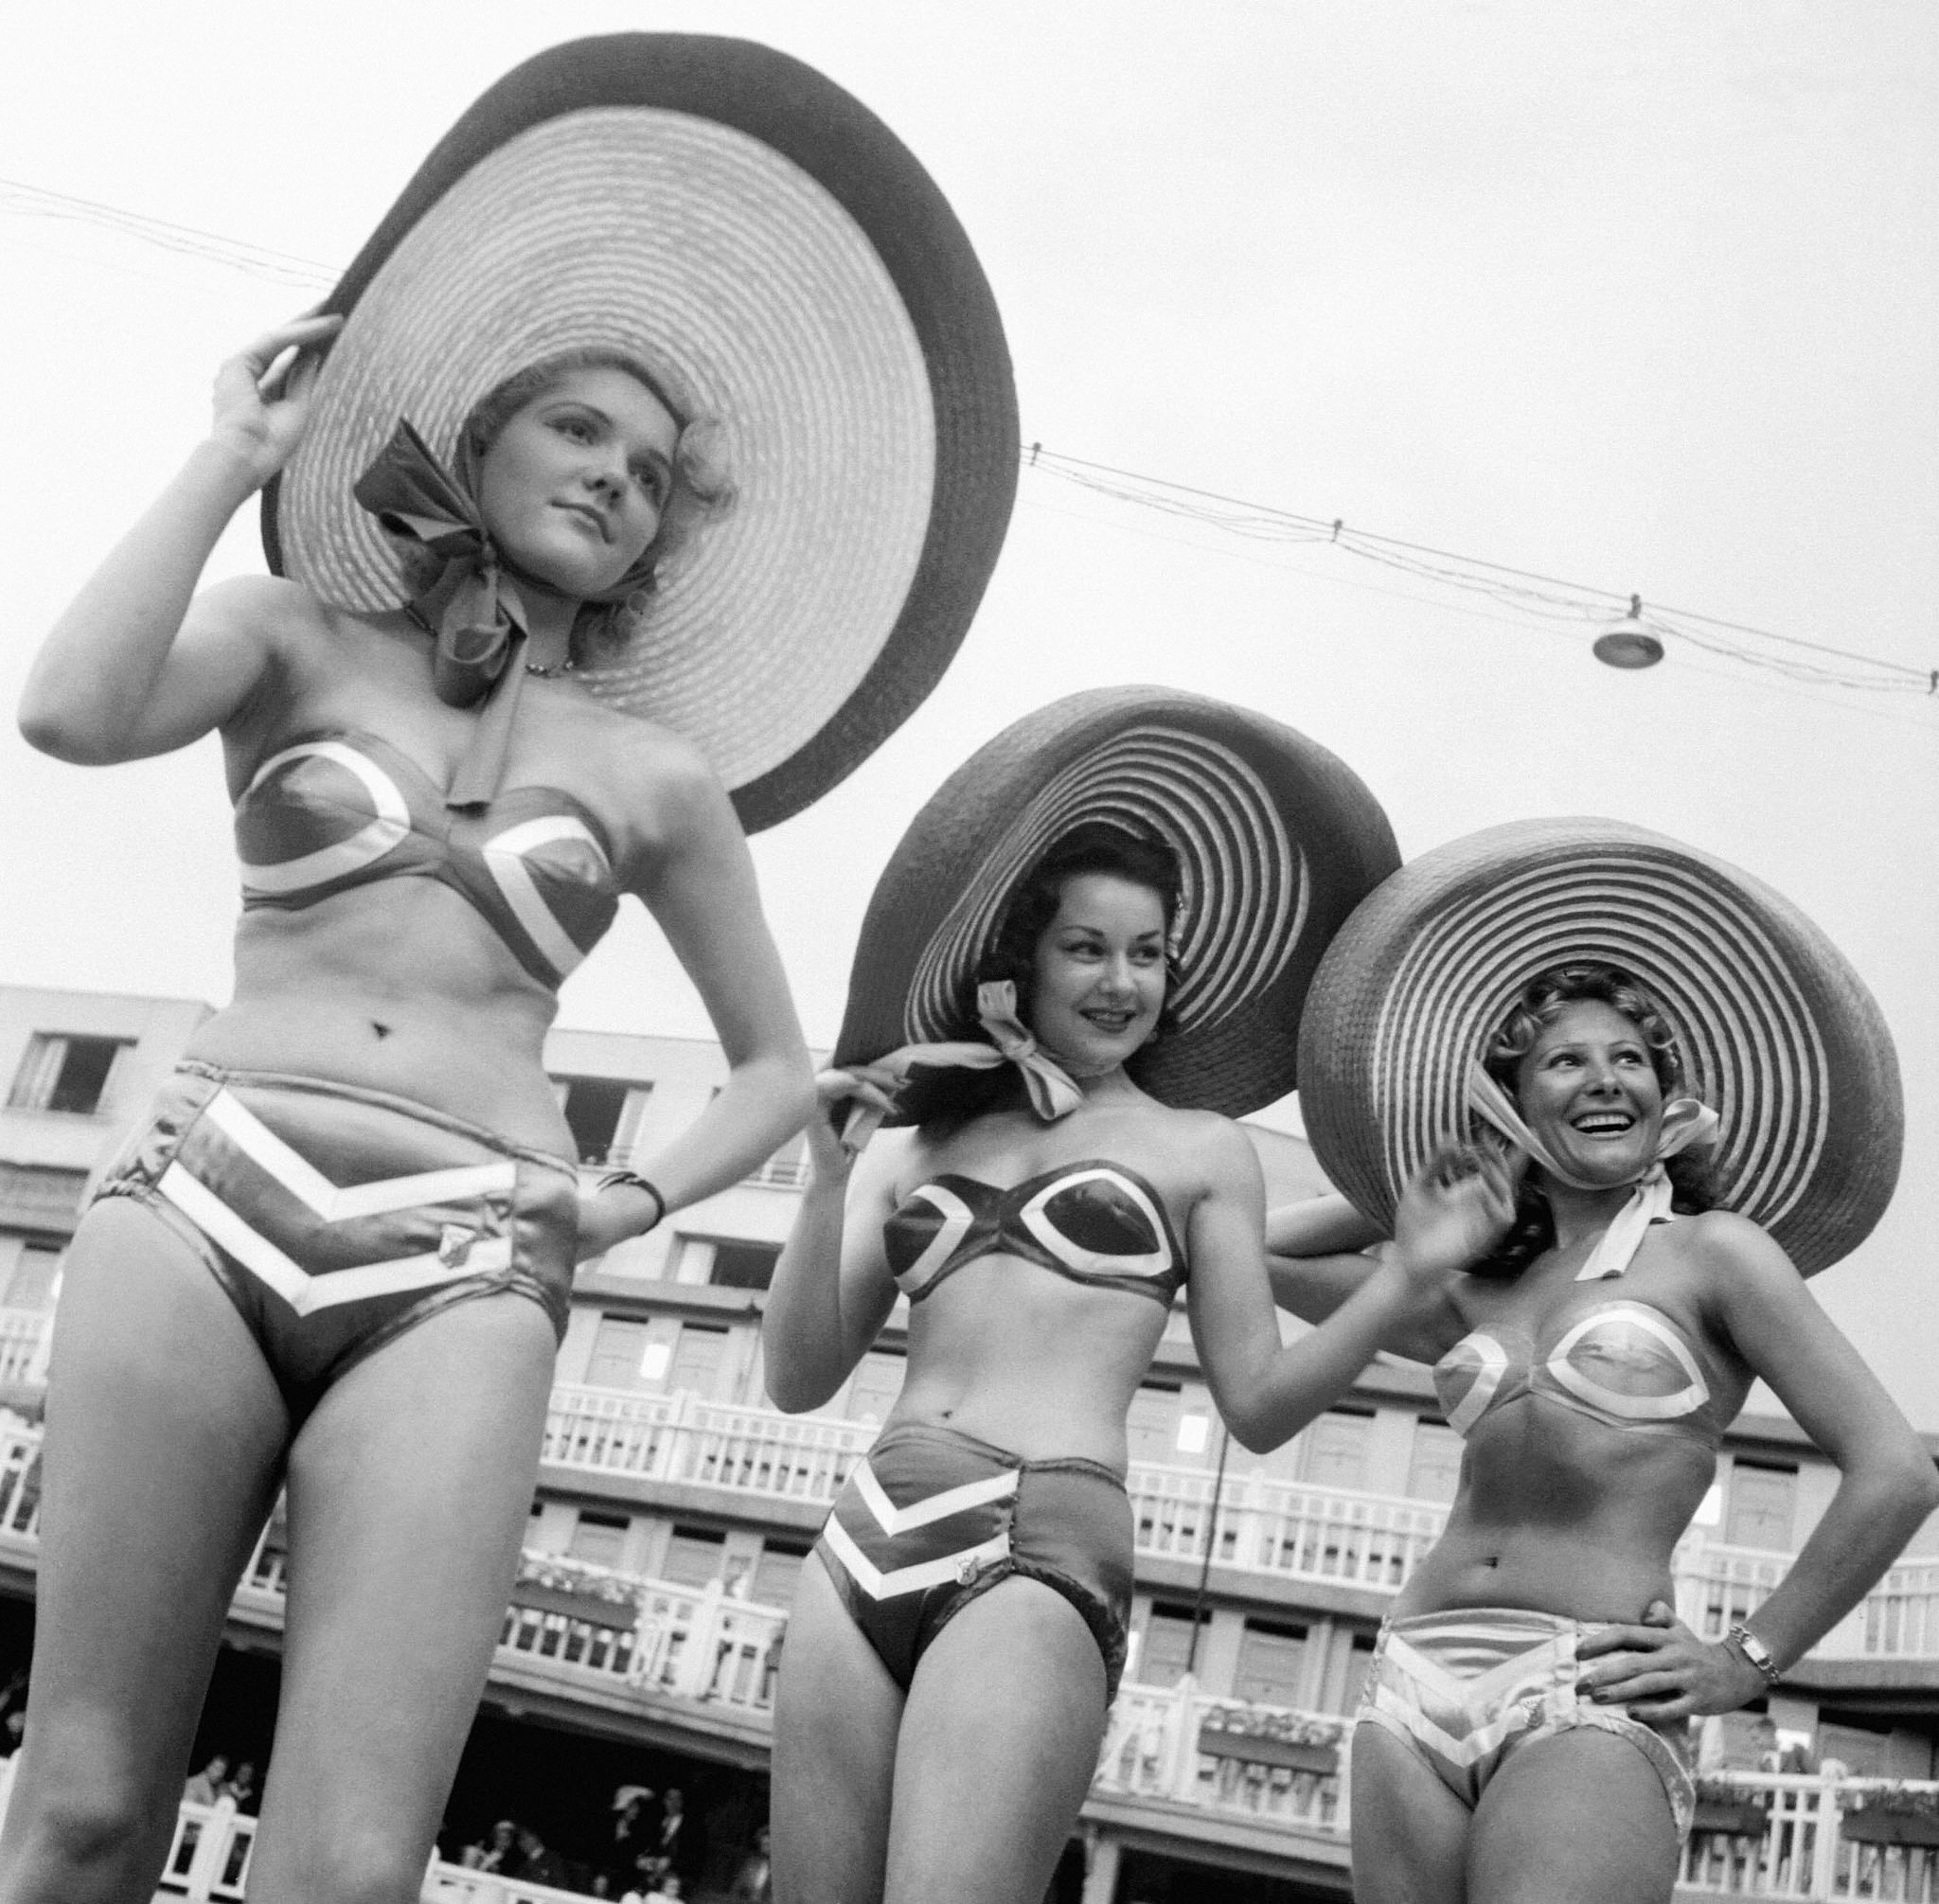 Models showing off a new kind of bikini in Miami, Florida in 1954.